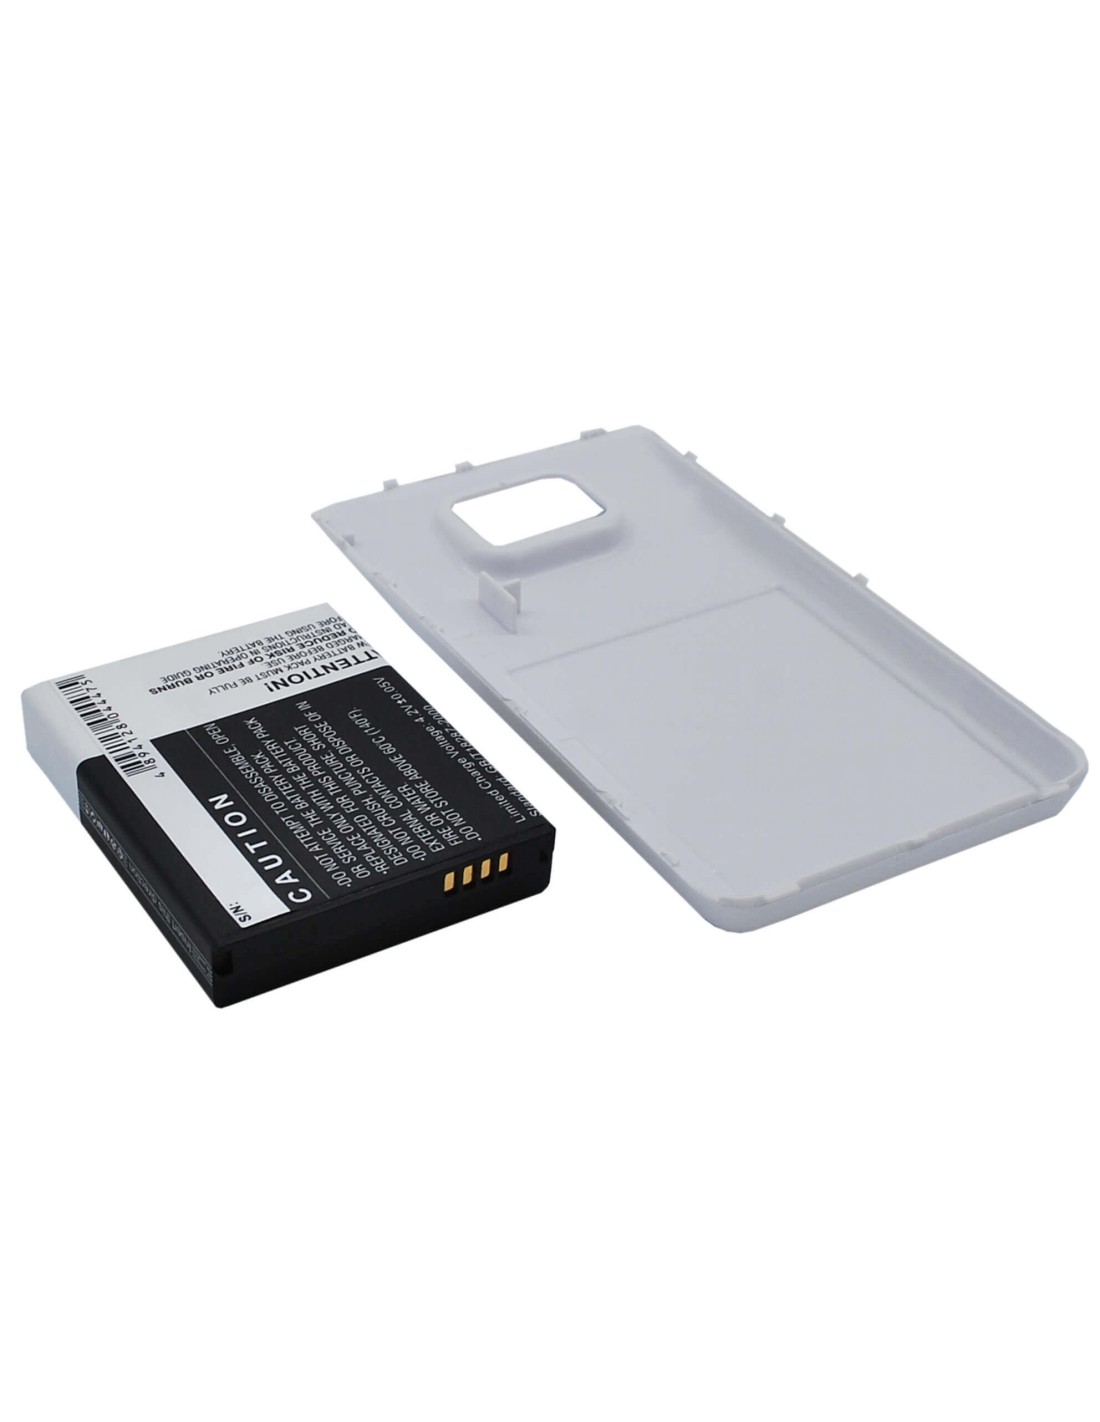 Battery for Samsung Galaxy S II, Galaxy S2, GT-I9100, white back cover 3.7V, 2600mAh - 9.62Wh